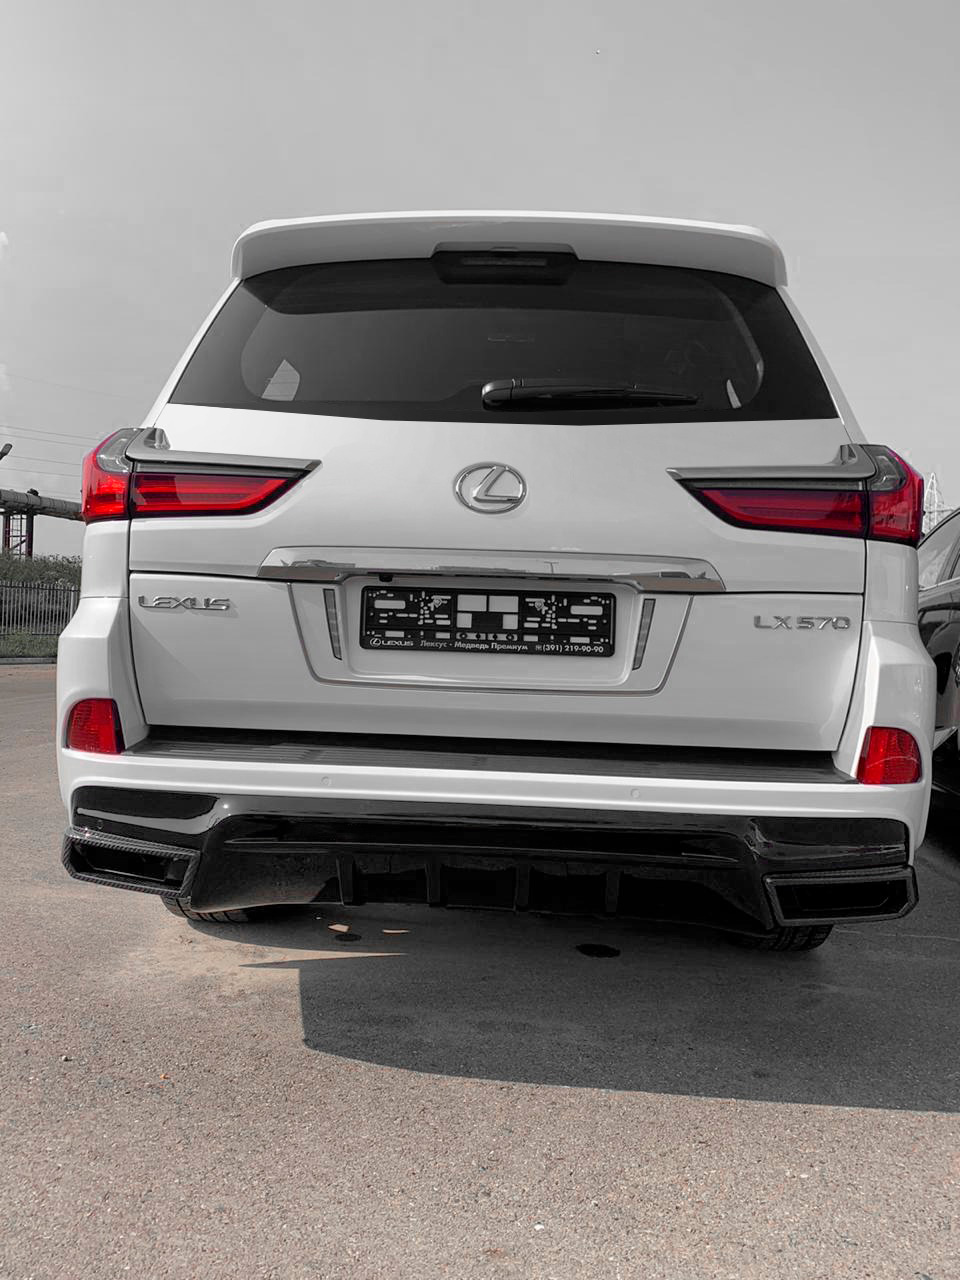 Check price and buy Renegade Design body kit for Lexus LX 450D/570